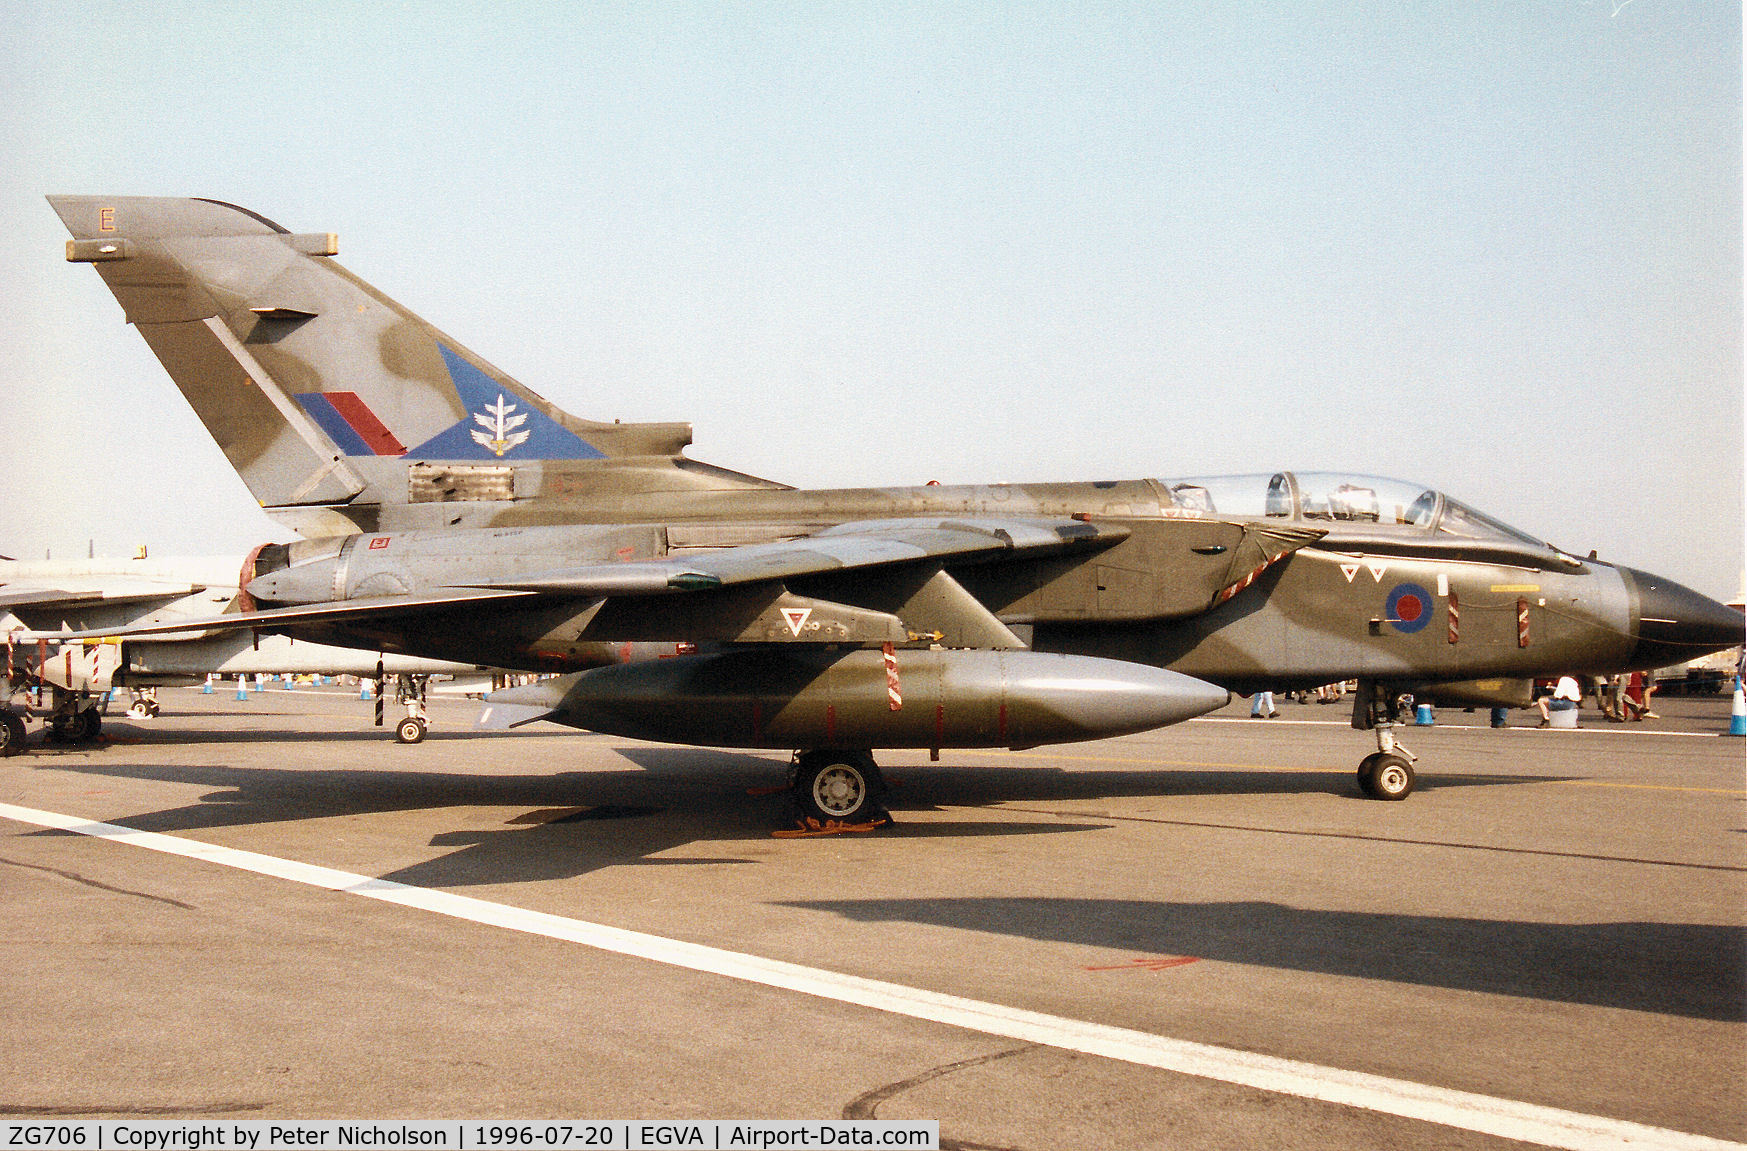 ZG706, 1989 Panavia Tornado GR.1A C/N BS173/813/3389, Tornado GR.1A of Boscombe Down's Strike Attack Operational Evaluation Unit [SAOEU] on display at the 1996 Royal Intnl Air Tattoo at RAF Fairford.